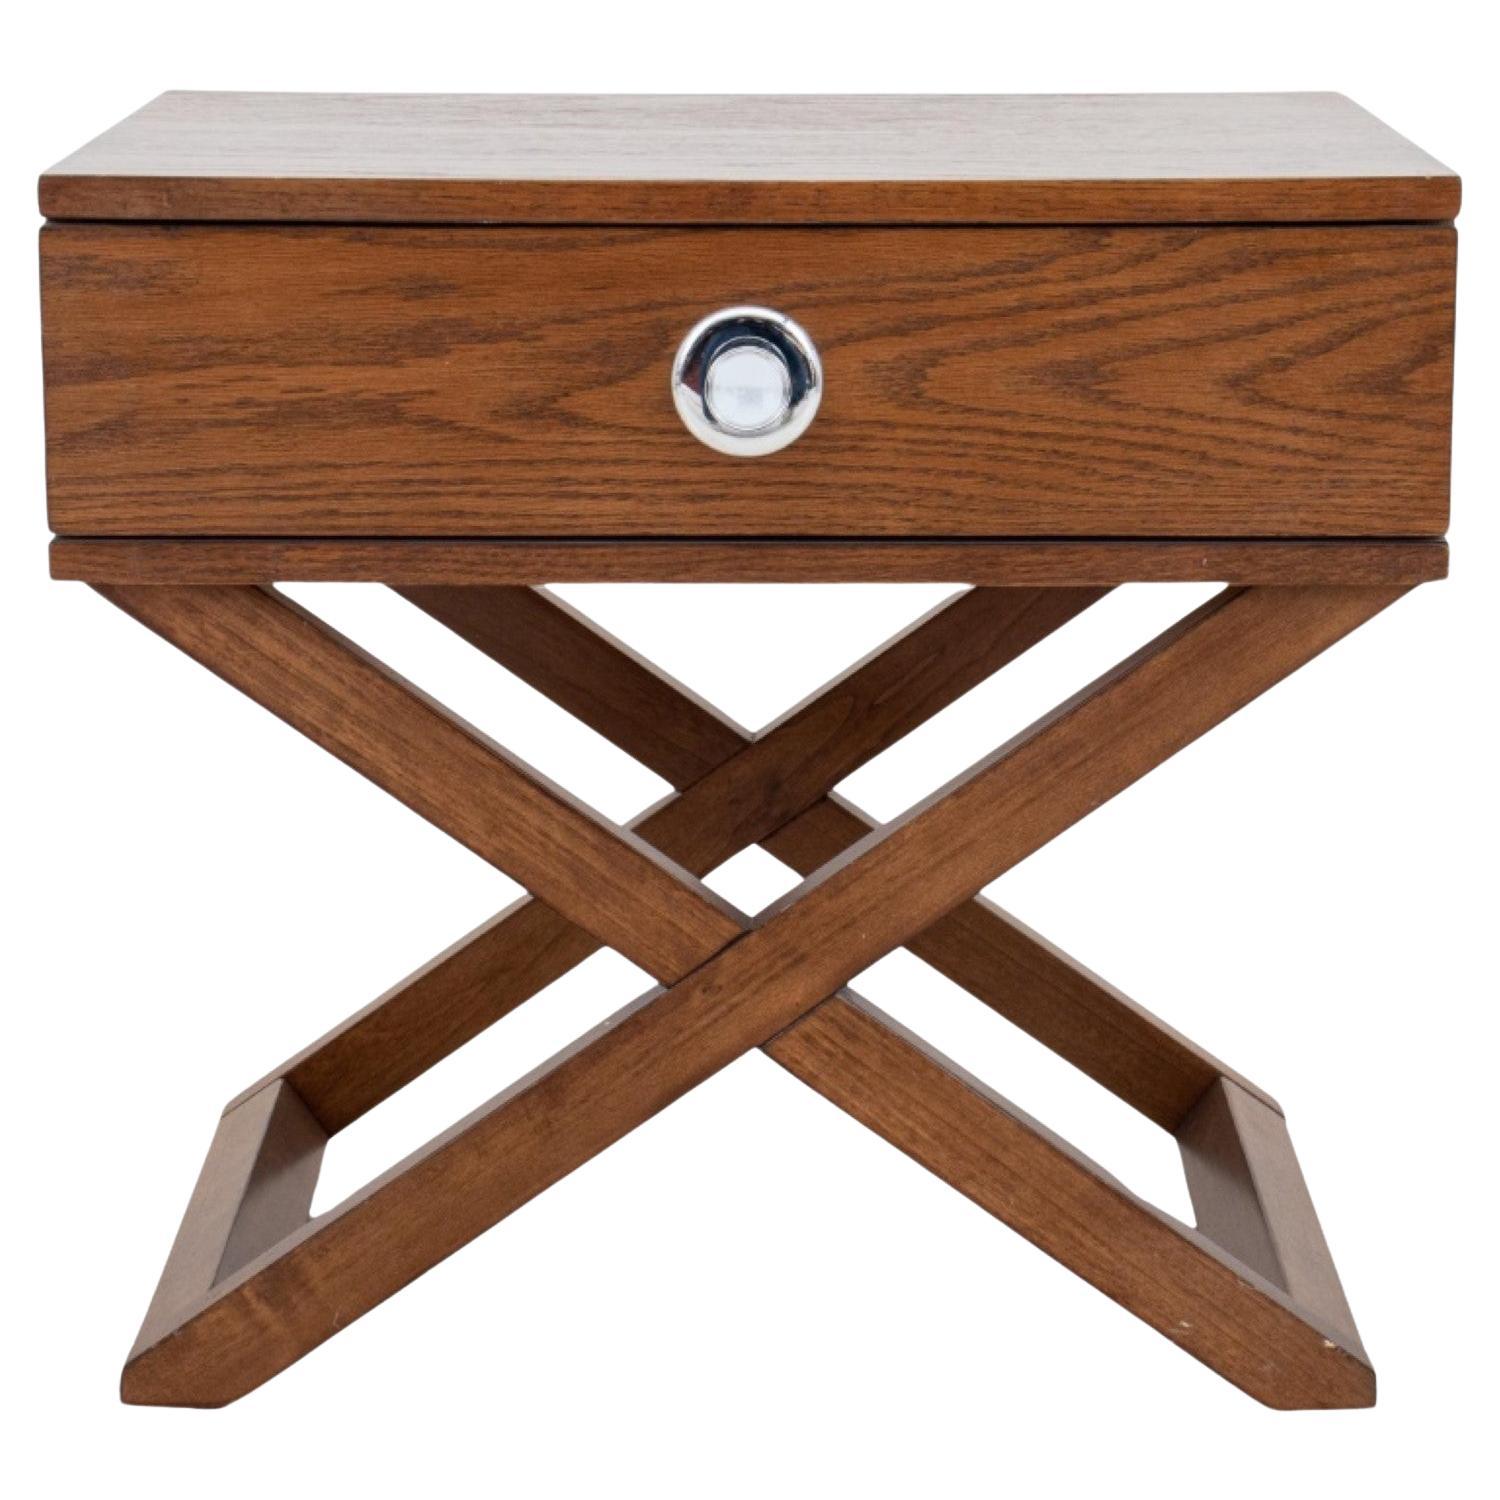 Campaign Style Wooden Nightstand For Sale